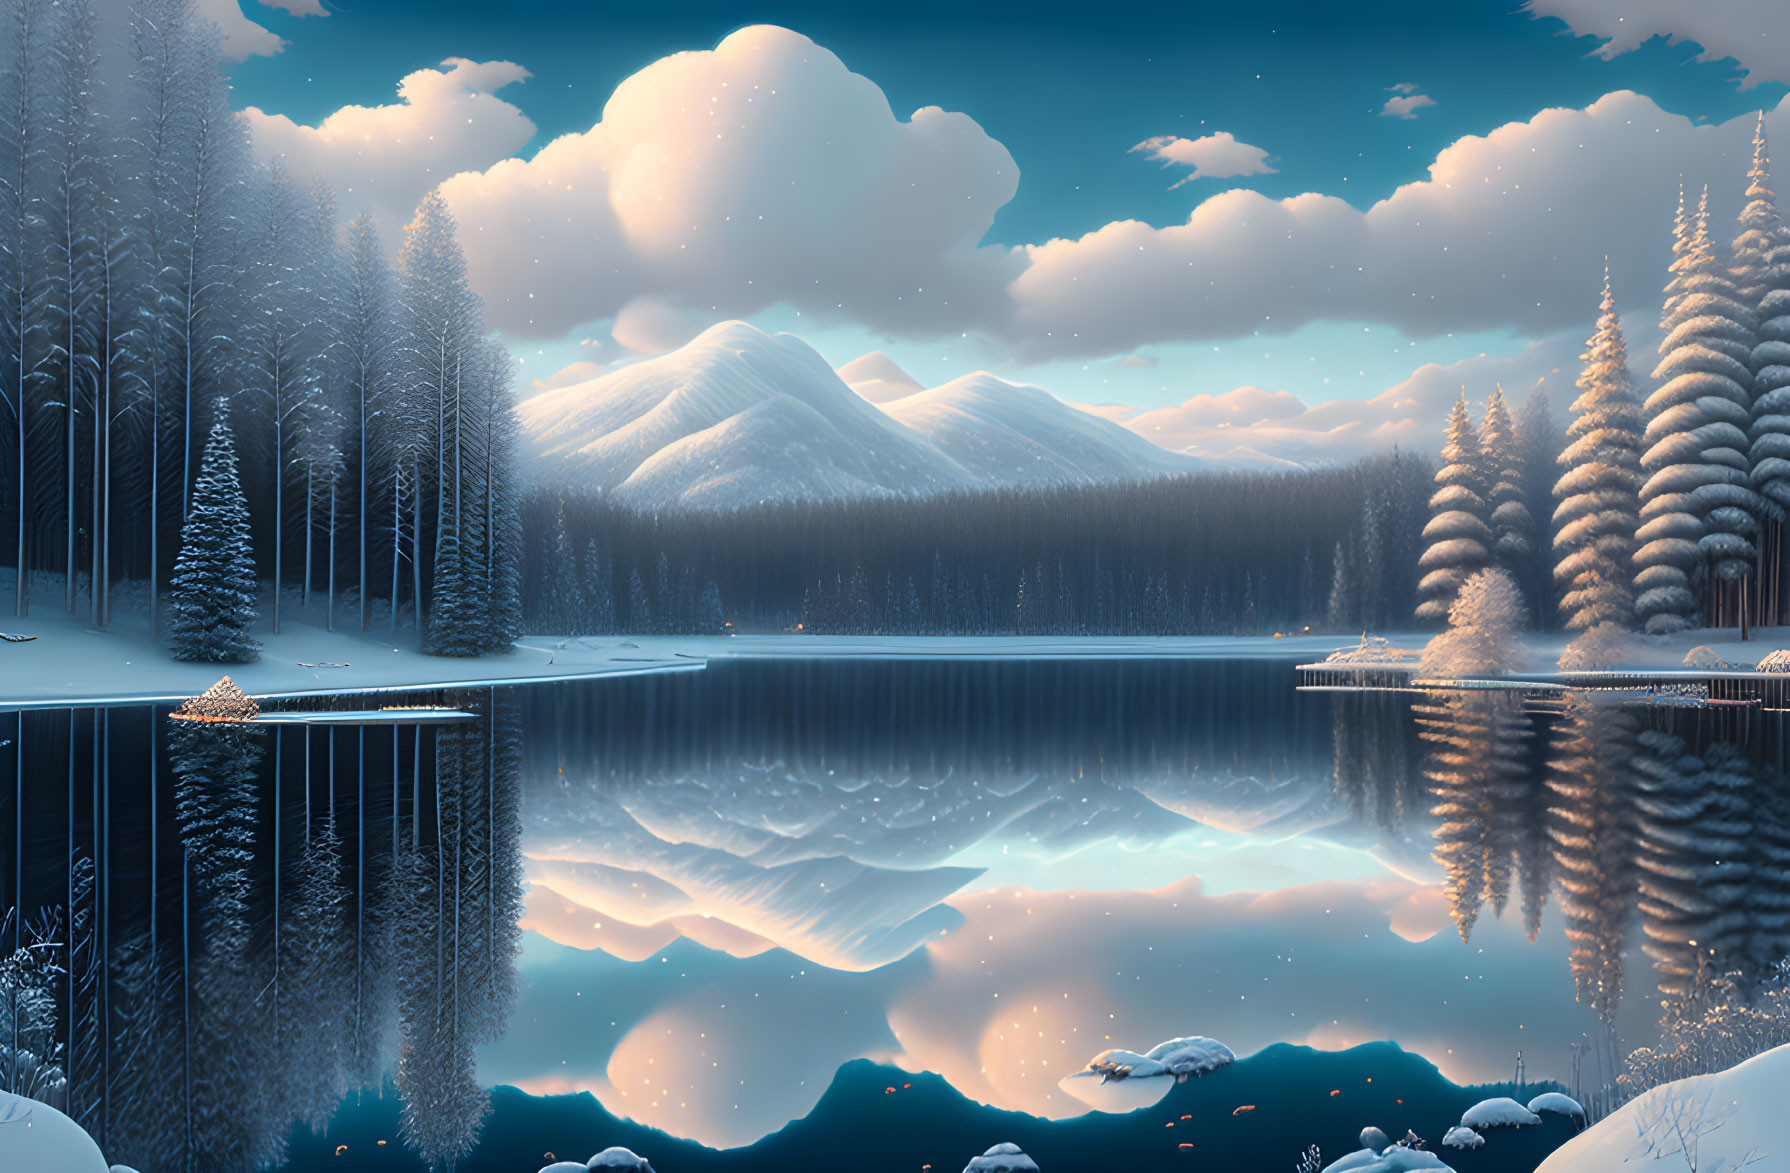 Snowy Lake Reflecting Pine Trees and Mountains at Twilight